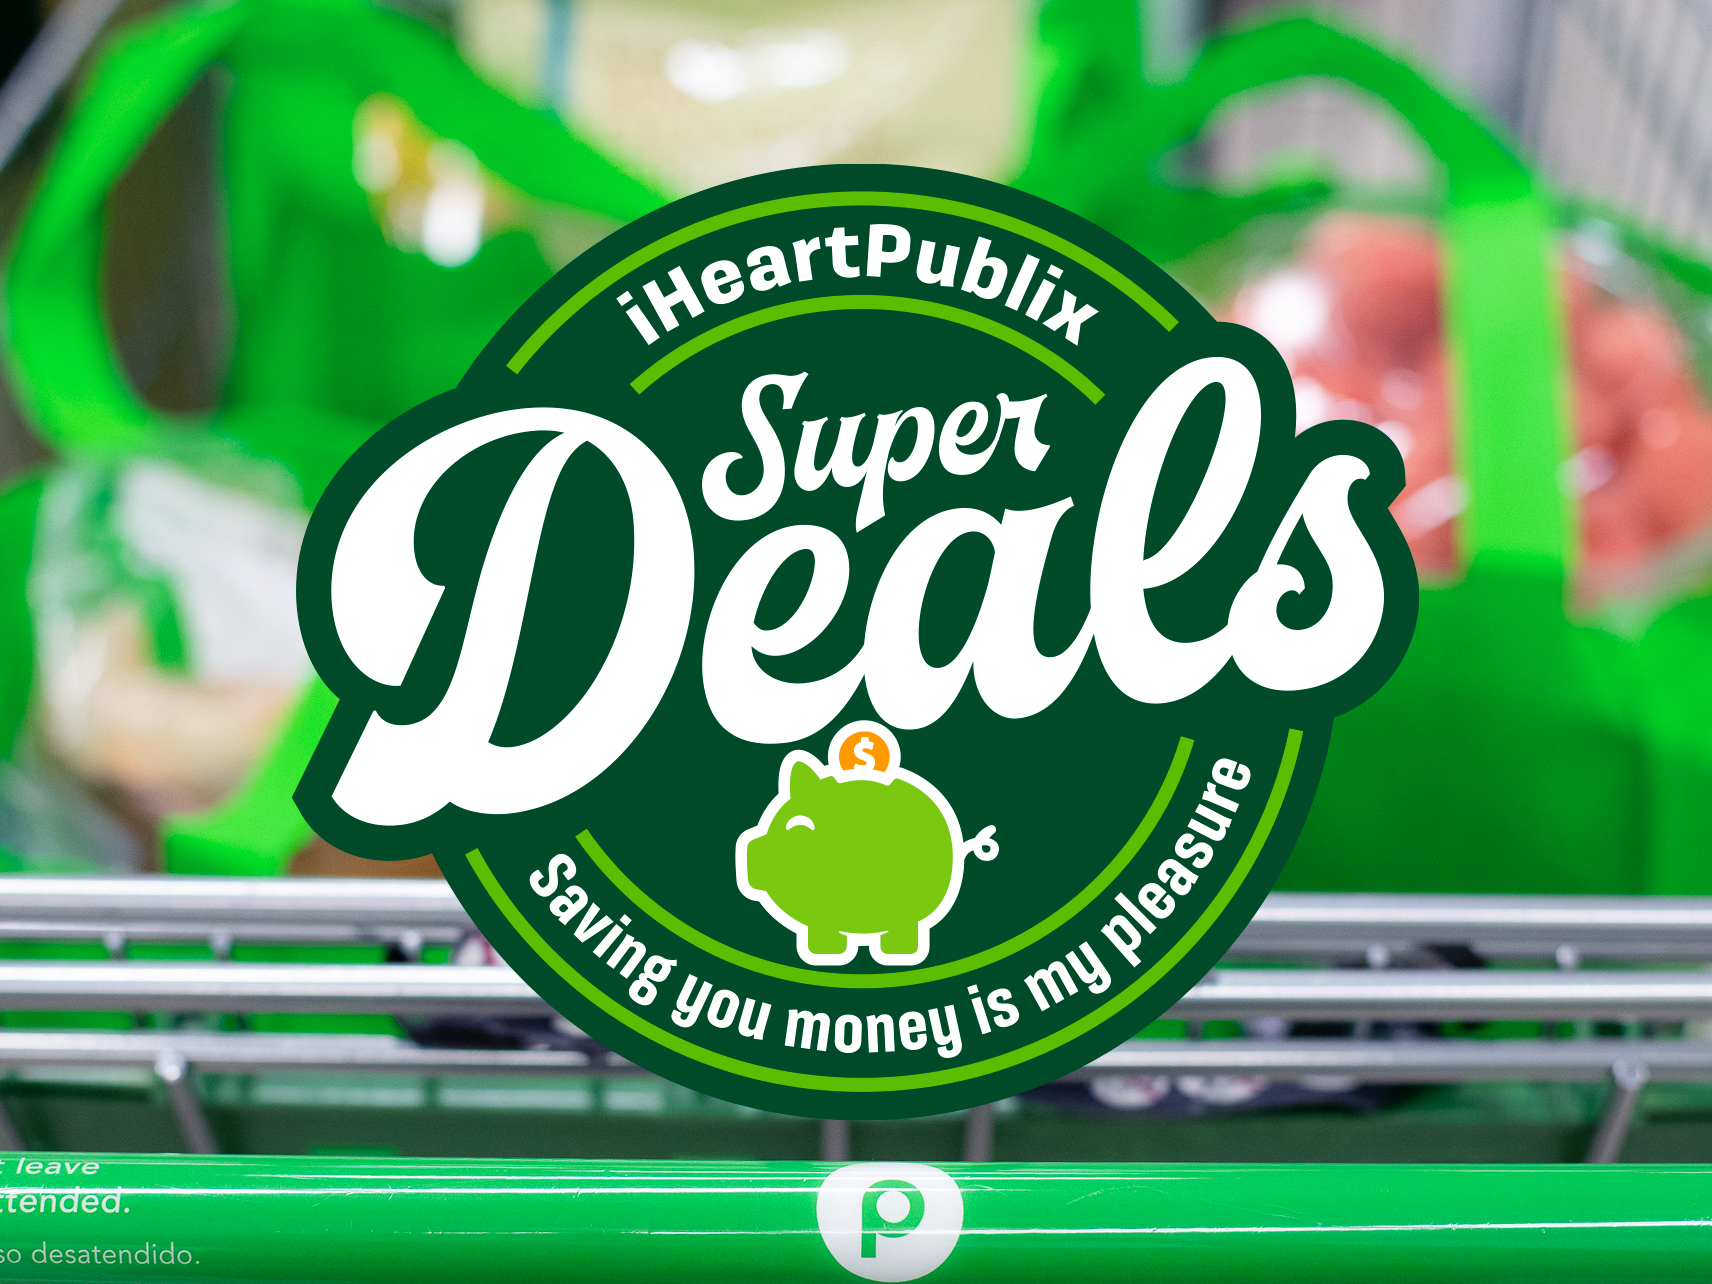 Publix Super Deals Week Of 4/13 to 4/19 (4/12 to 4/18 For Some)